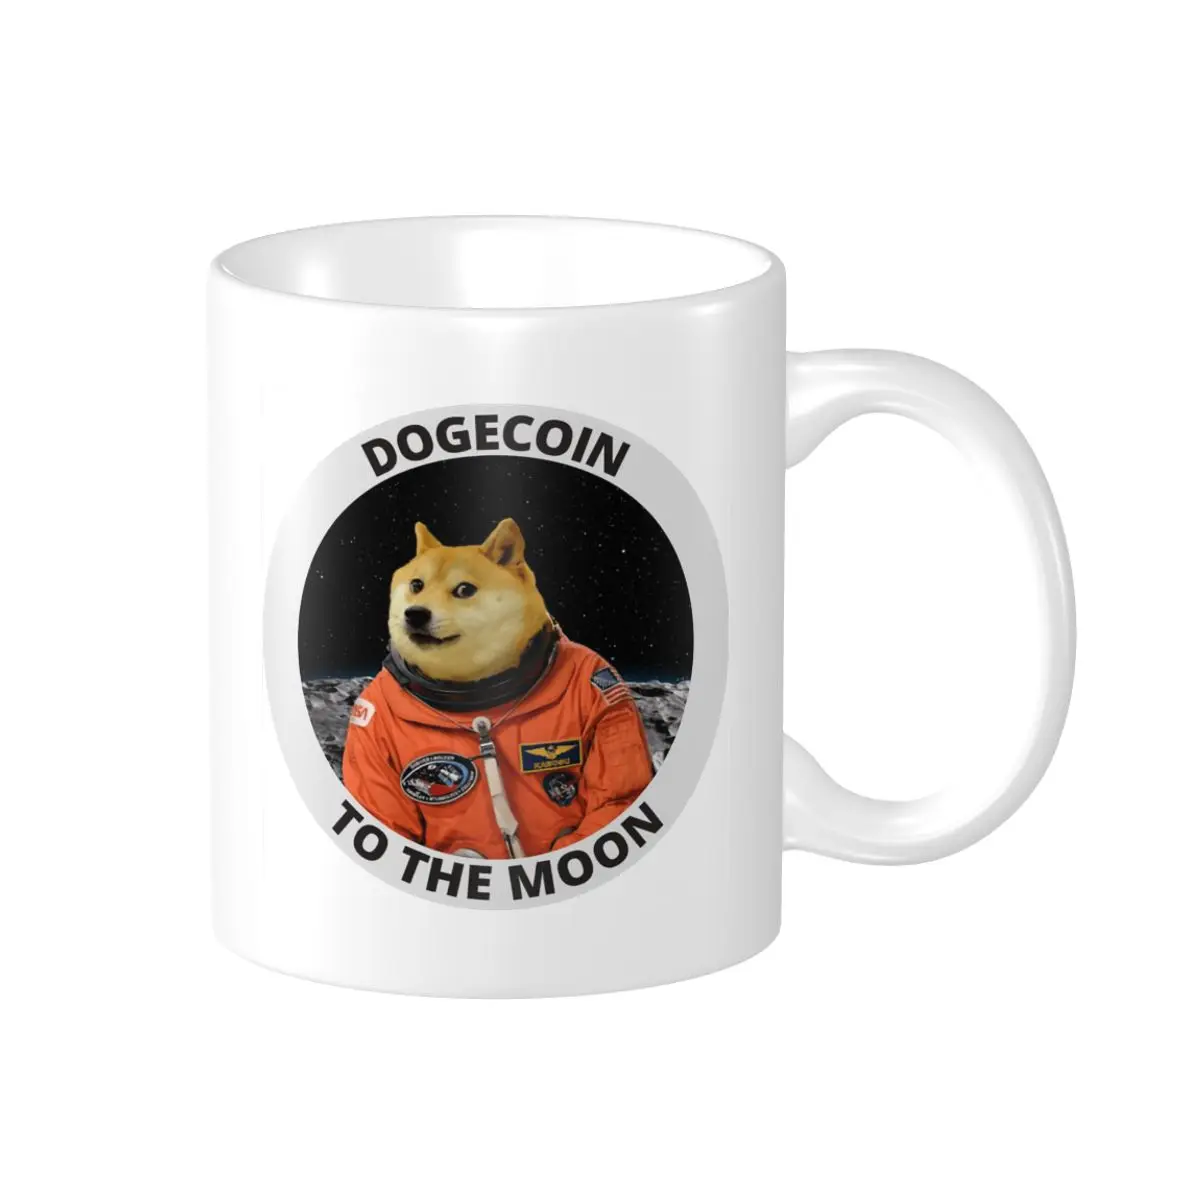 

Promo Dogecoin To The Moon (10) Mugs Novelty Cups CUPS Print Funny R376 multi-function cups